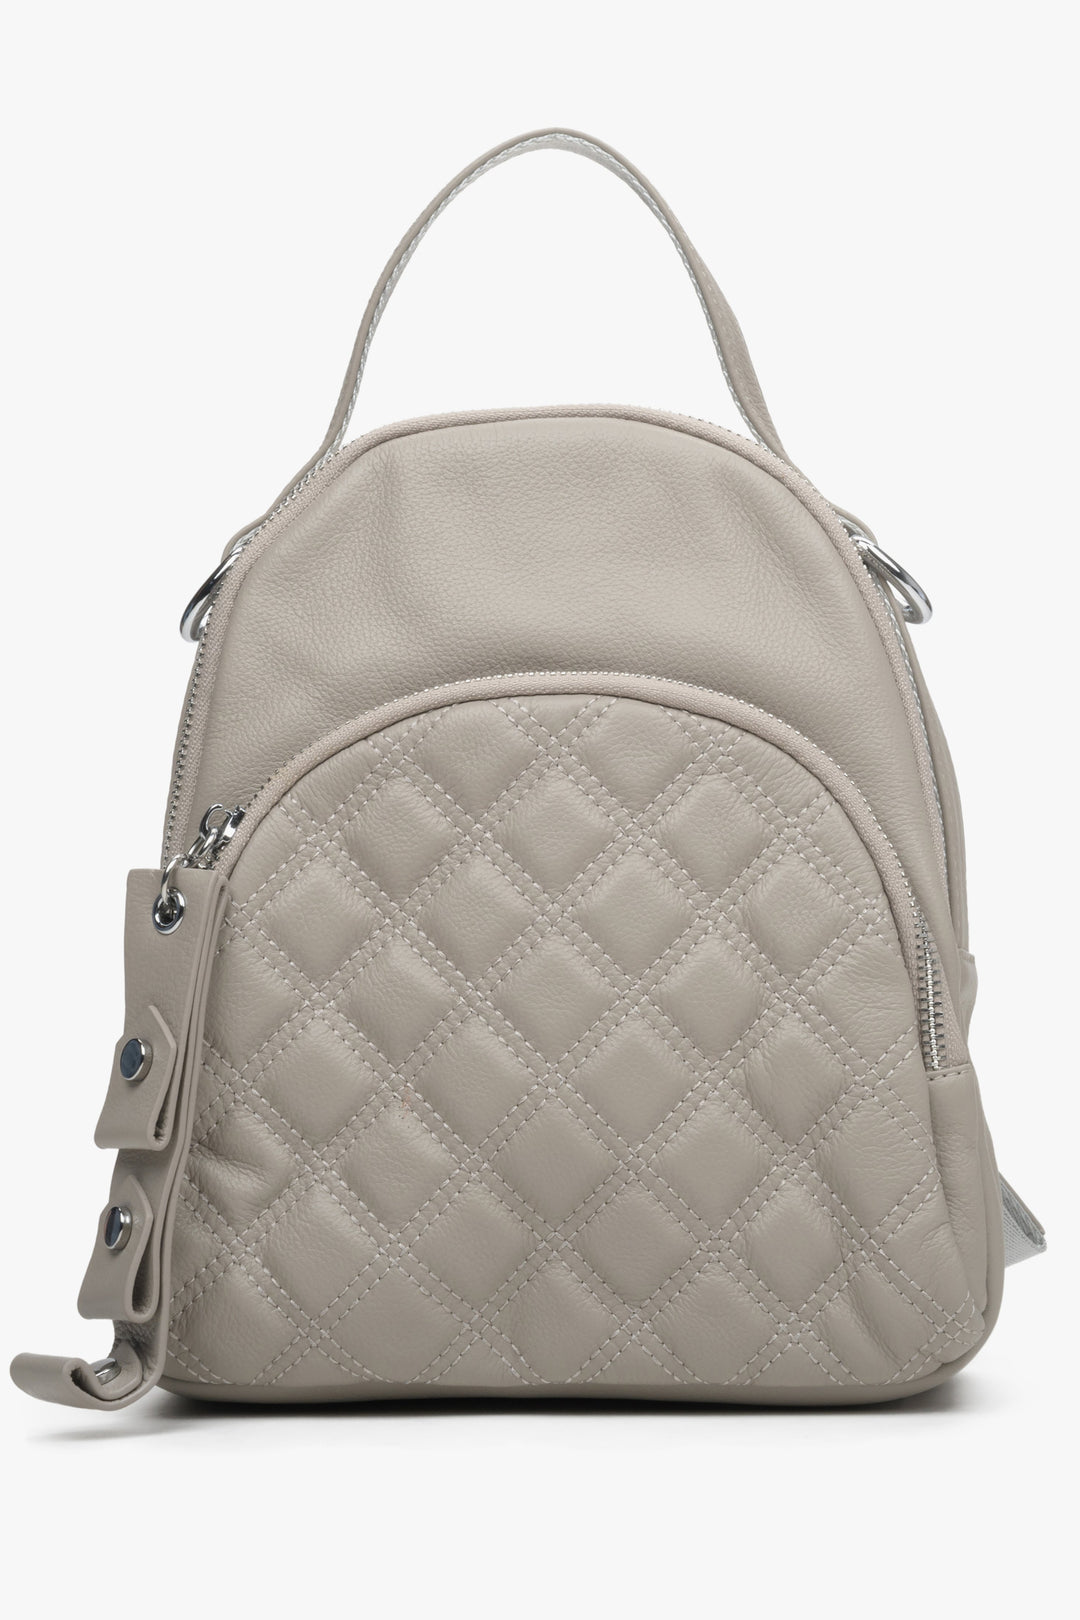 Small Urban Women's Backpack made of Genuine Leather in Beige Estro ER00113717.